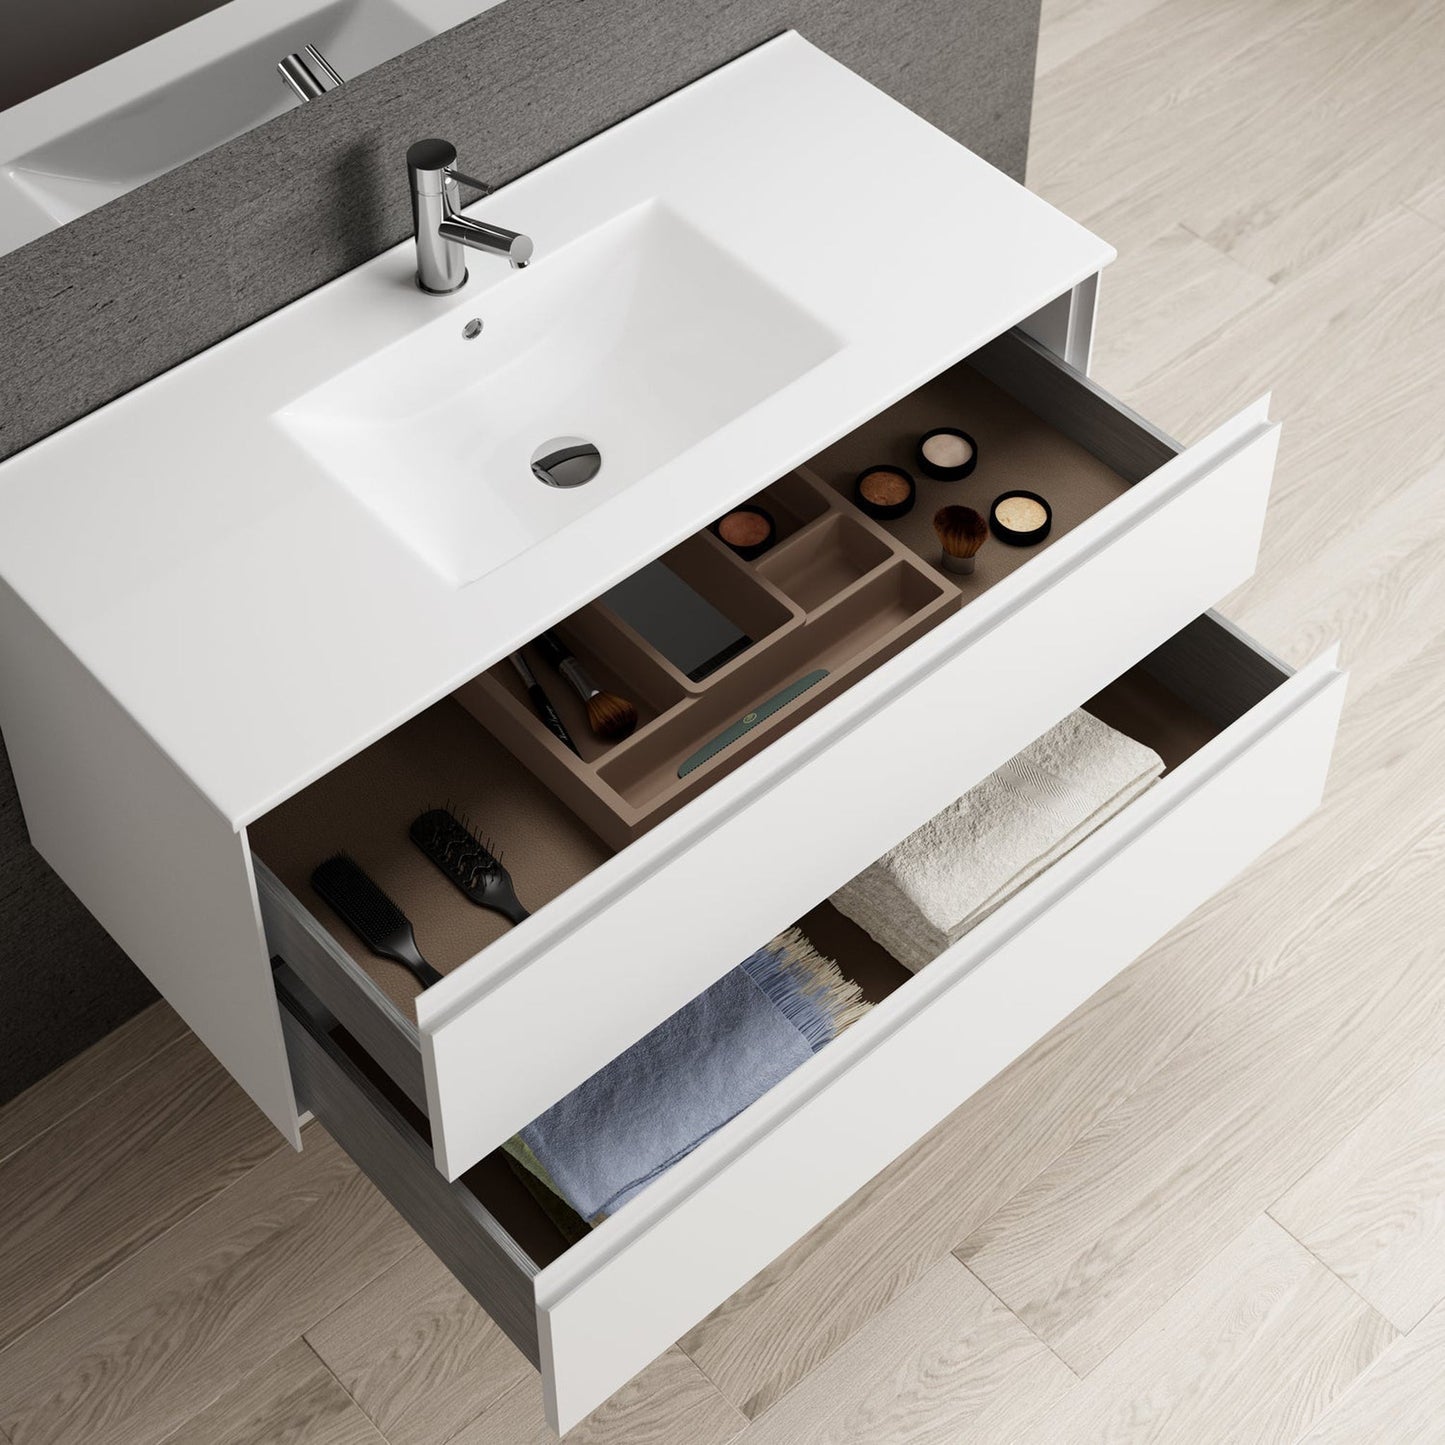 Eviva Bloom 32" x 34" Matte White Wall-Mounted Bathroom Vanity With White Single Integrated Porcelain Sink